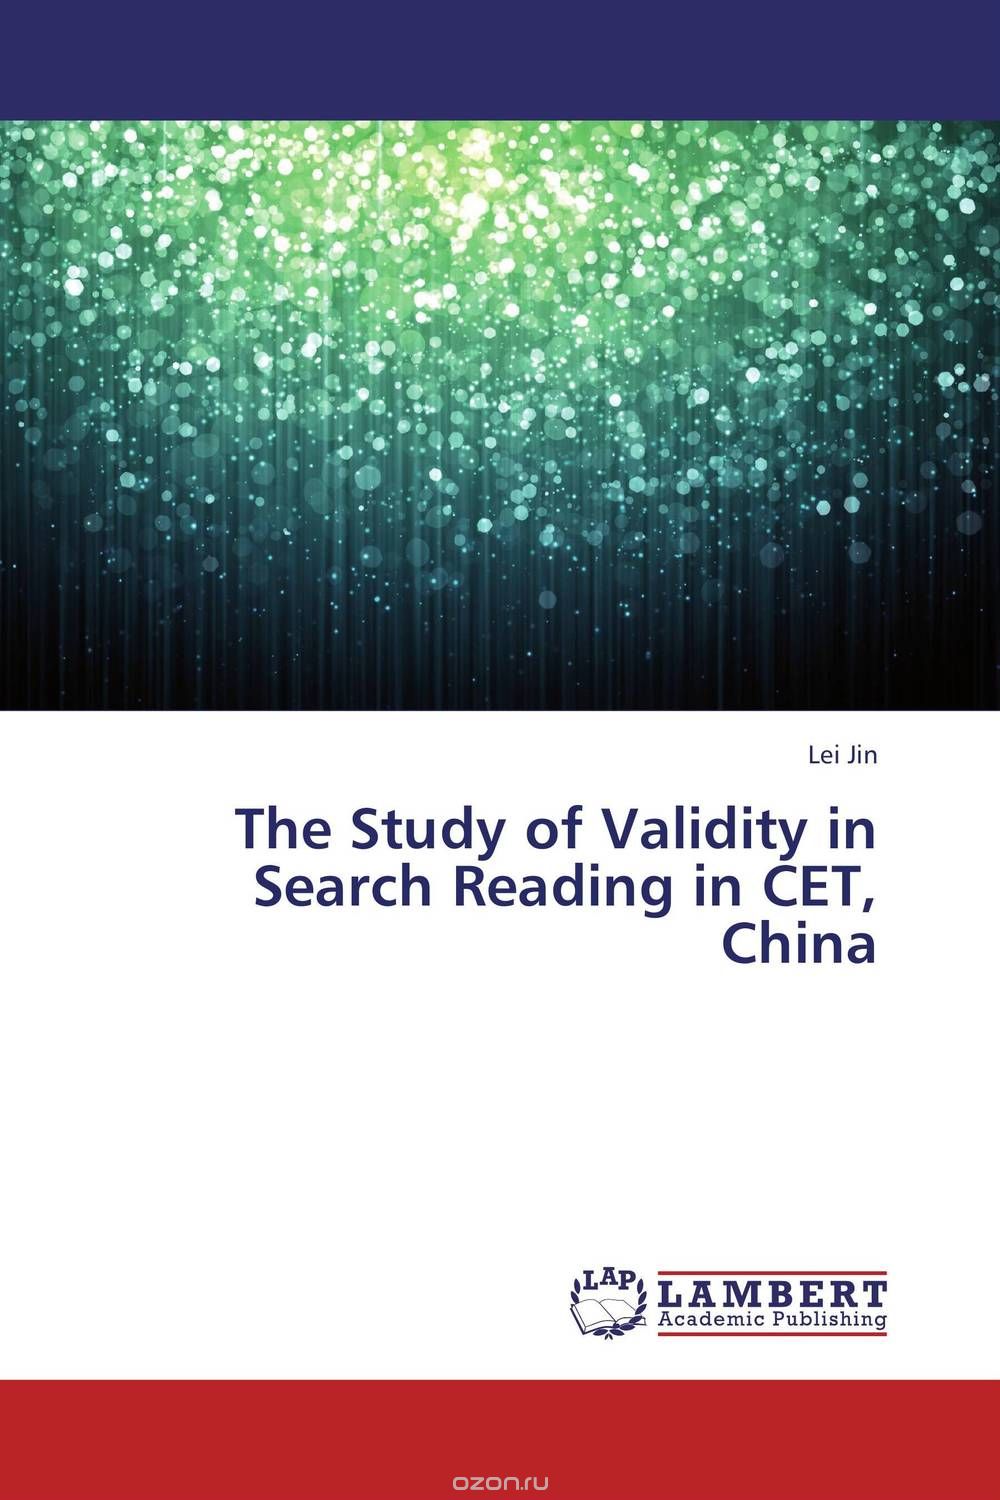 Скачать книгу "The Study of Validity in Search Reading in CET, China"